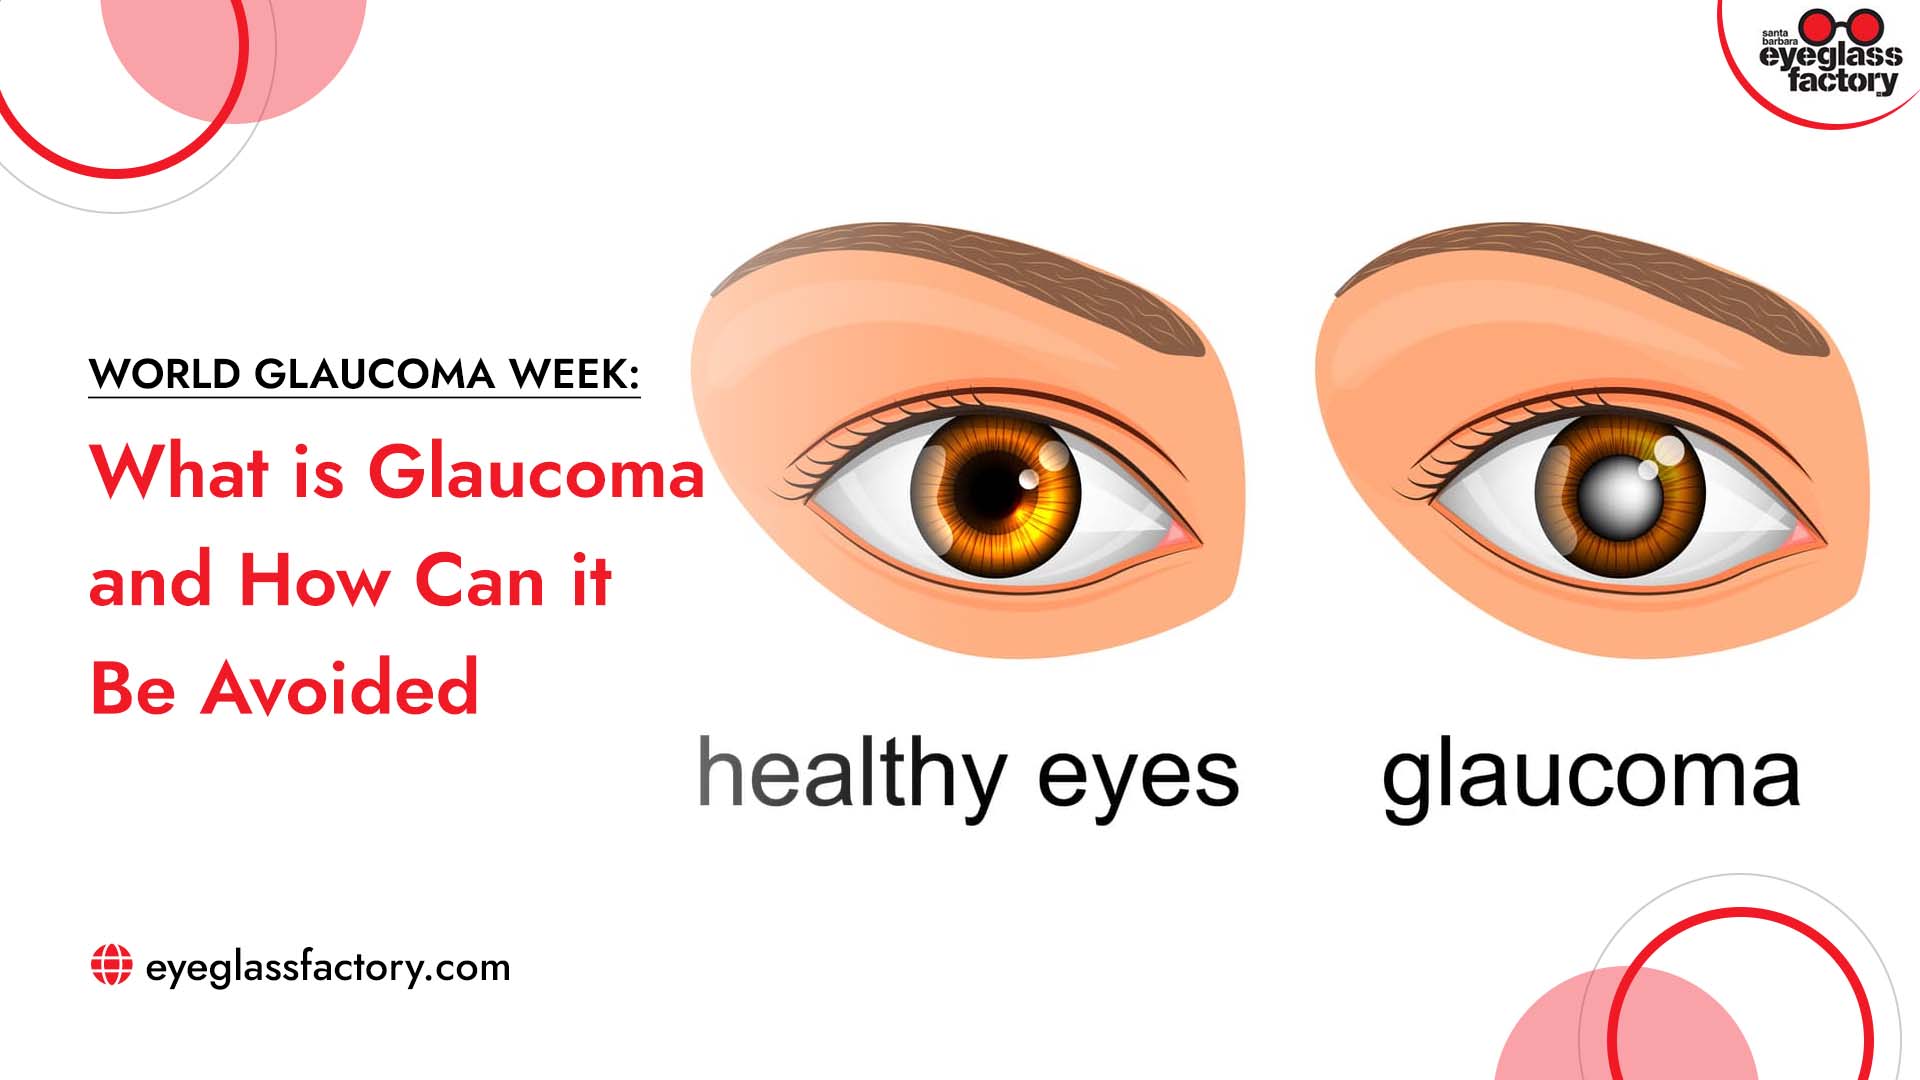 What is Glaucoma and How Can it Be Avoided